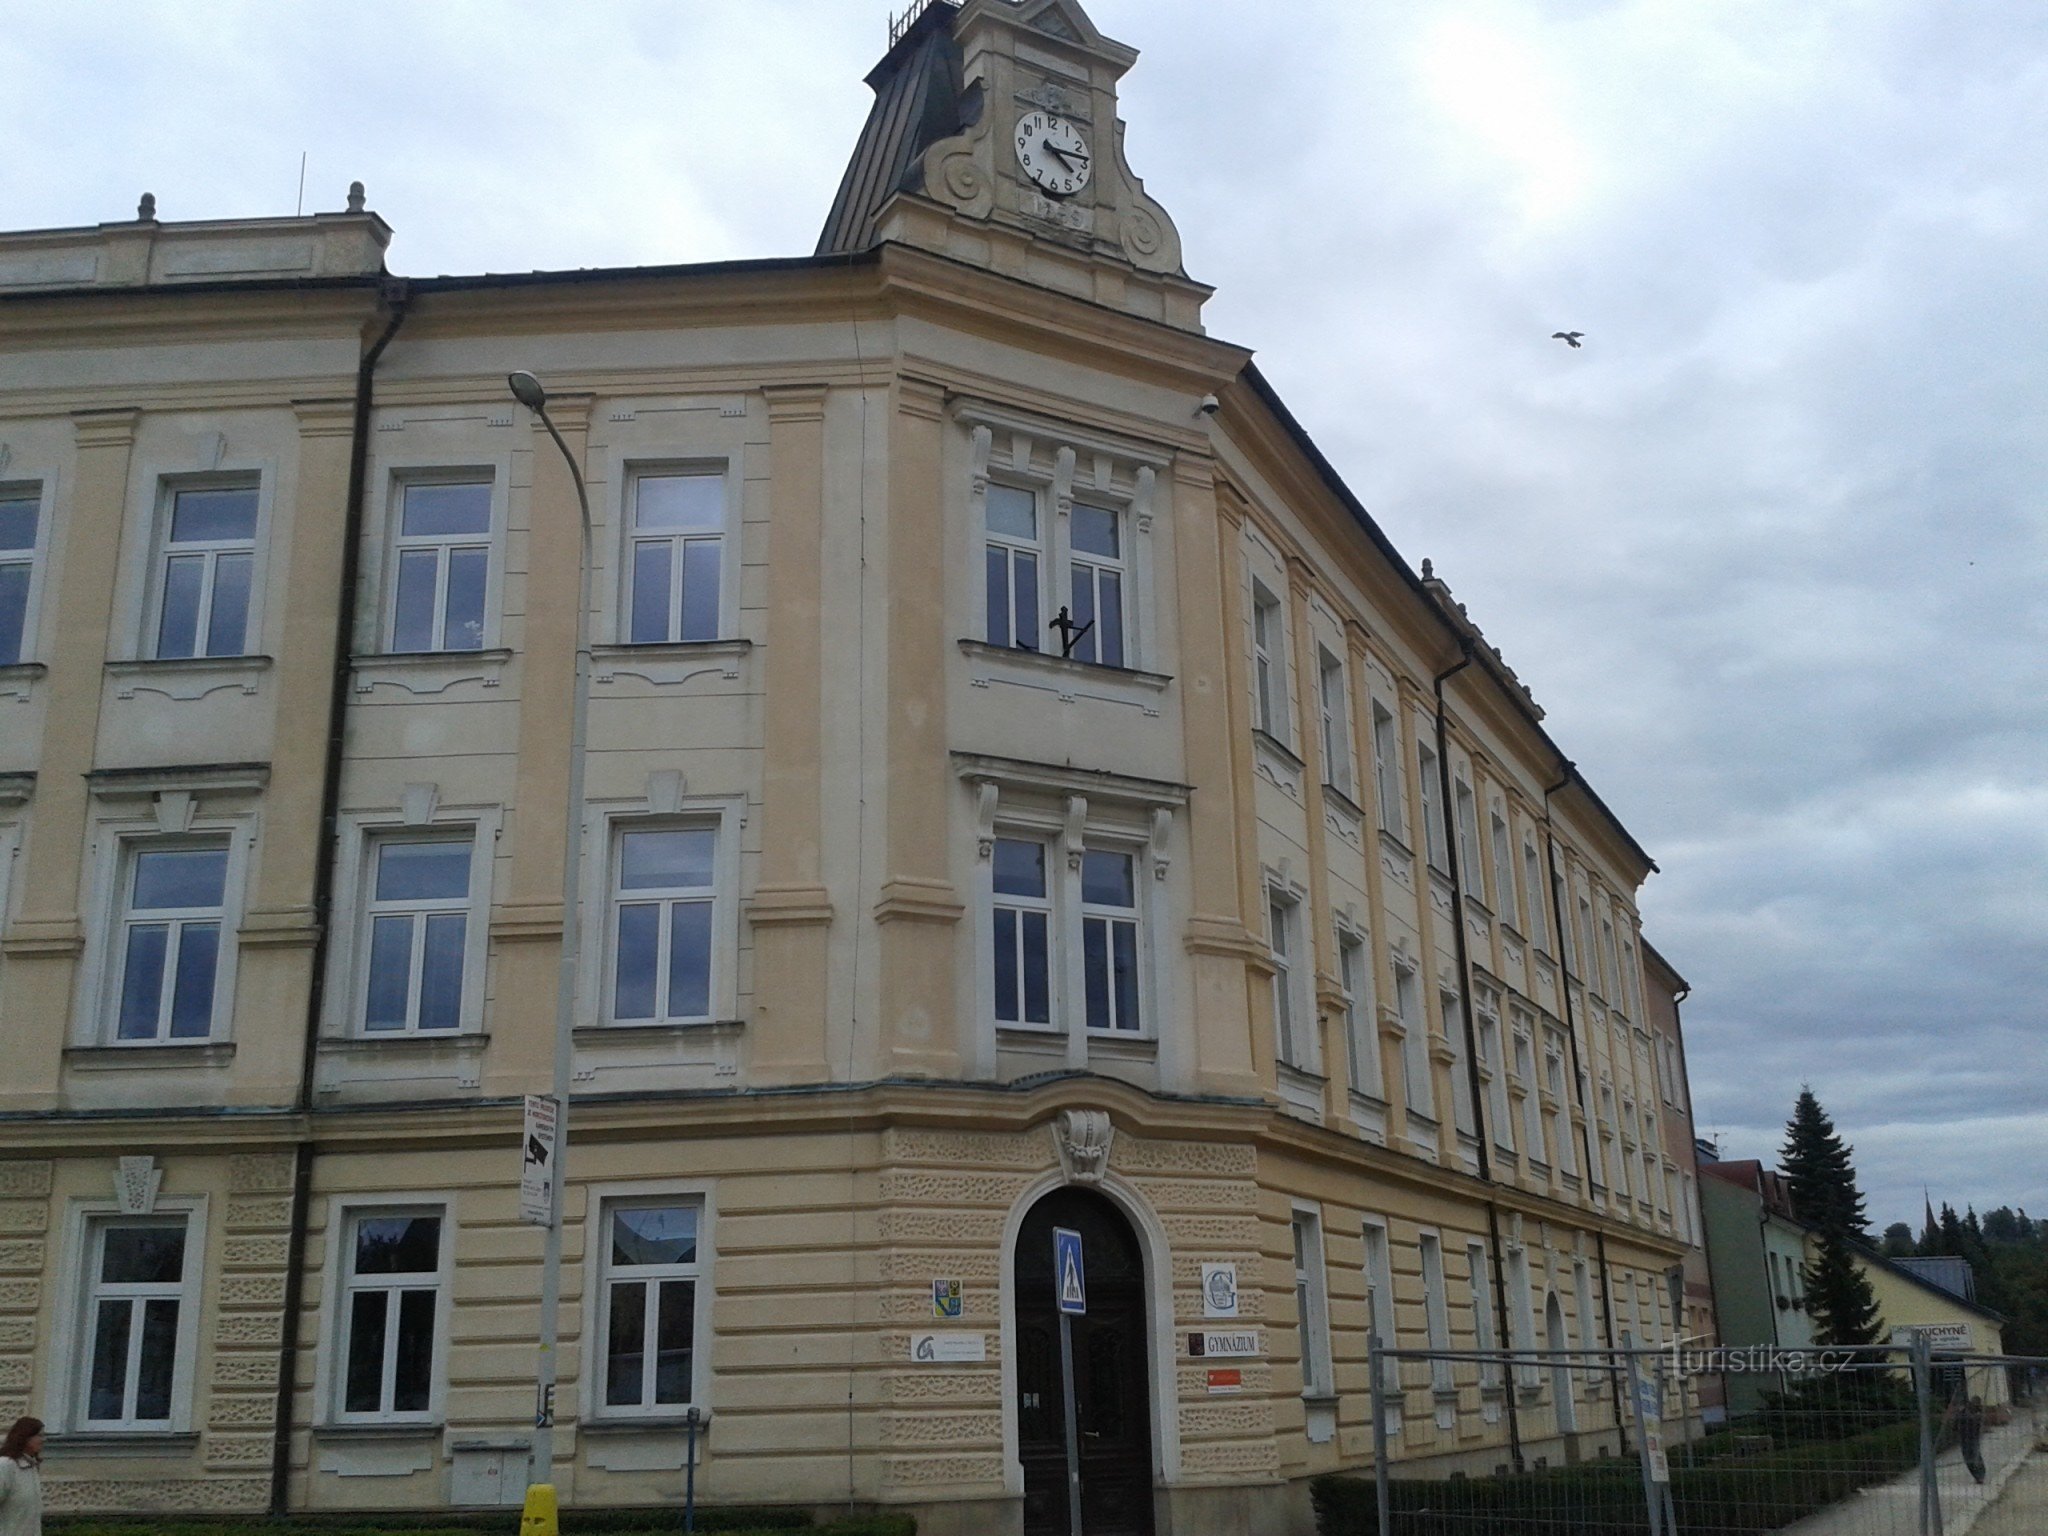 Zábřeh - gymnasium building - the first and oldest secondary school in Northwest Moravia